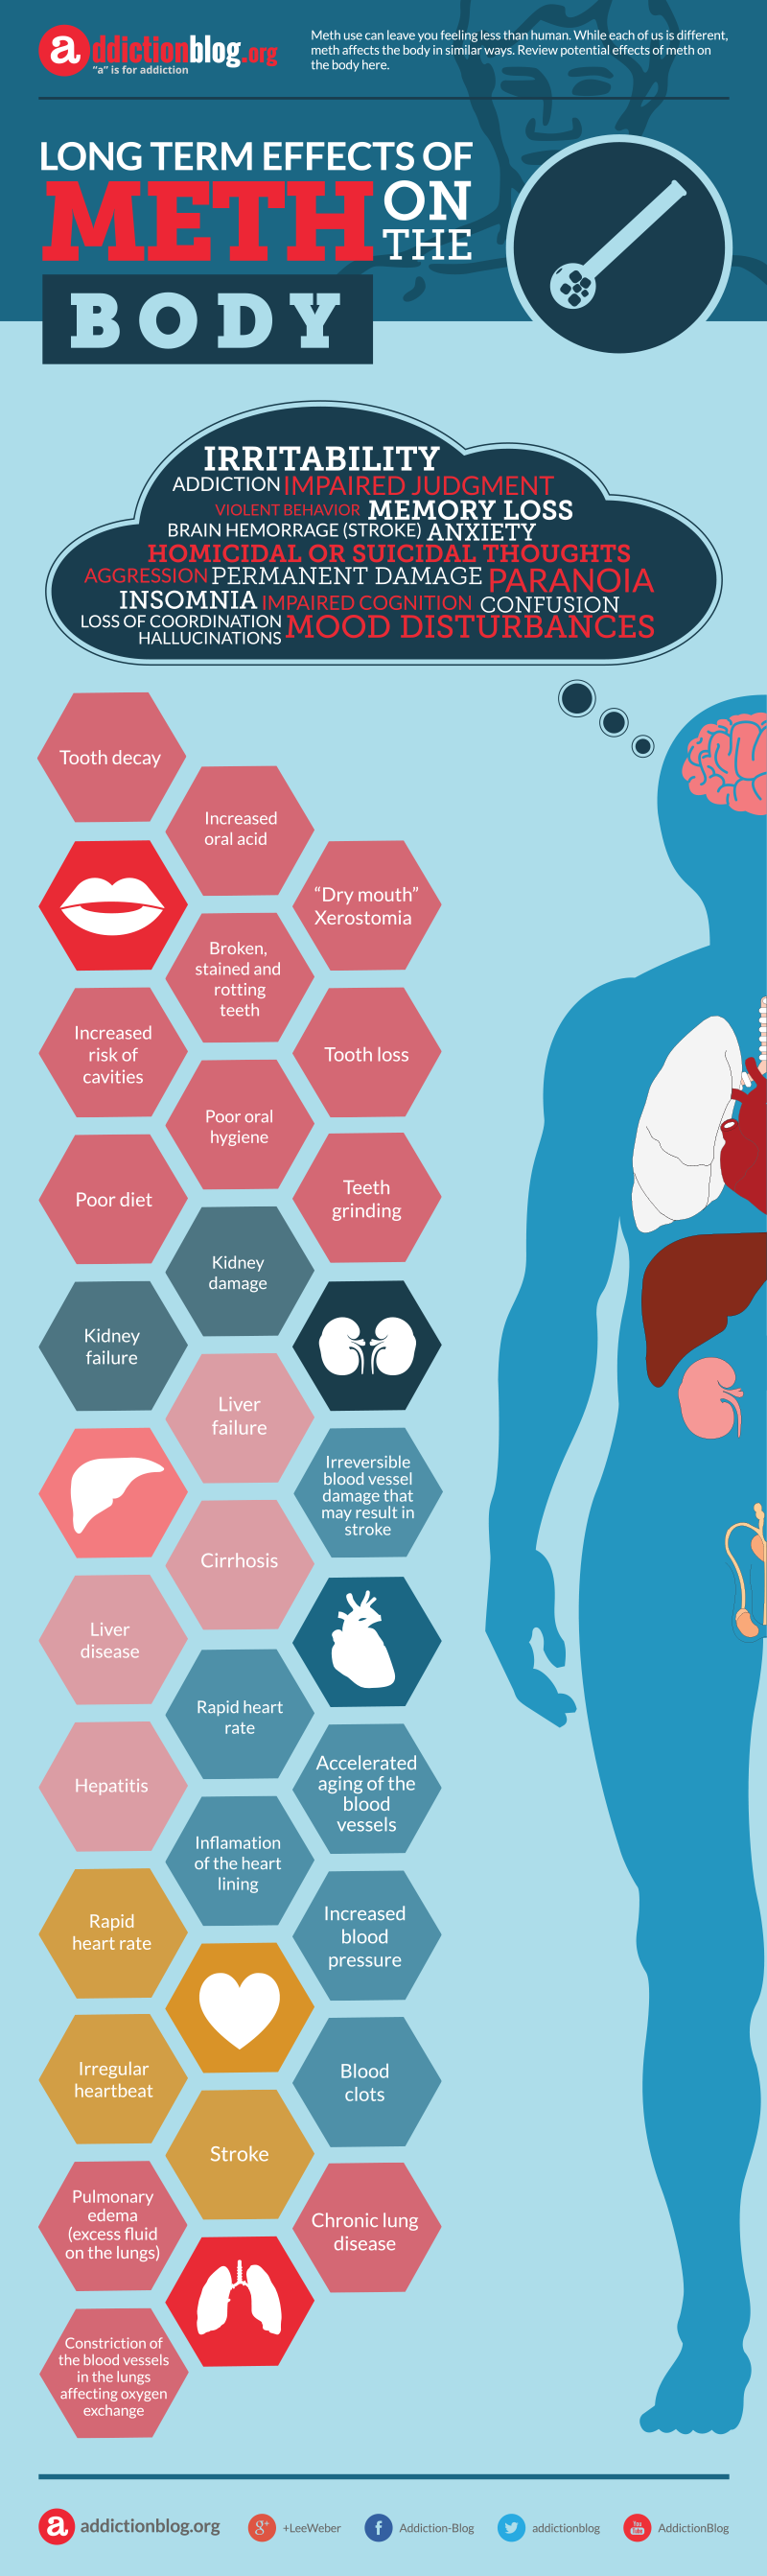 Long term effects of meth on the body (INFOGRAPHIC)